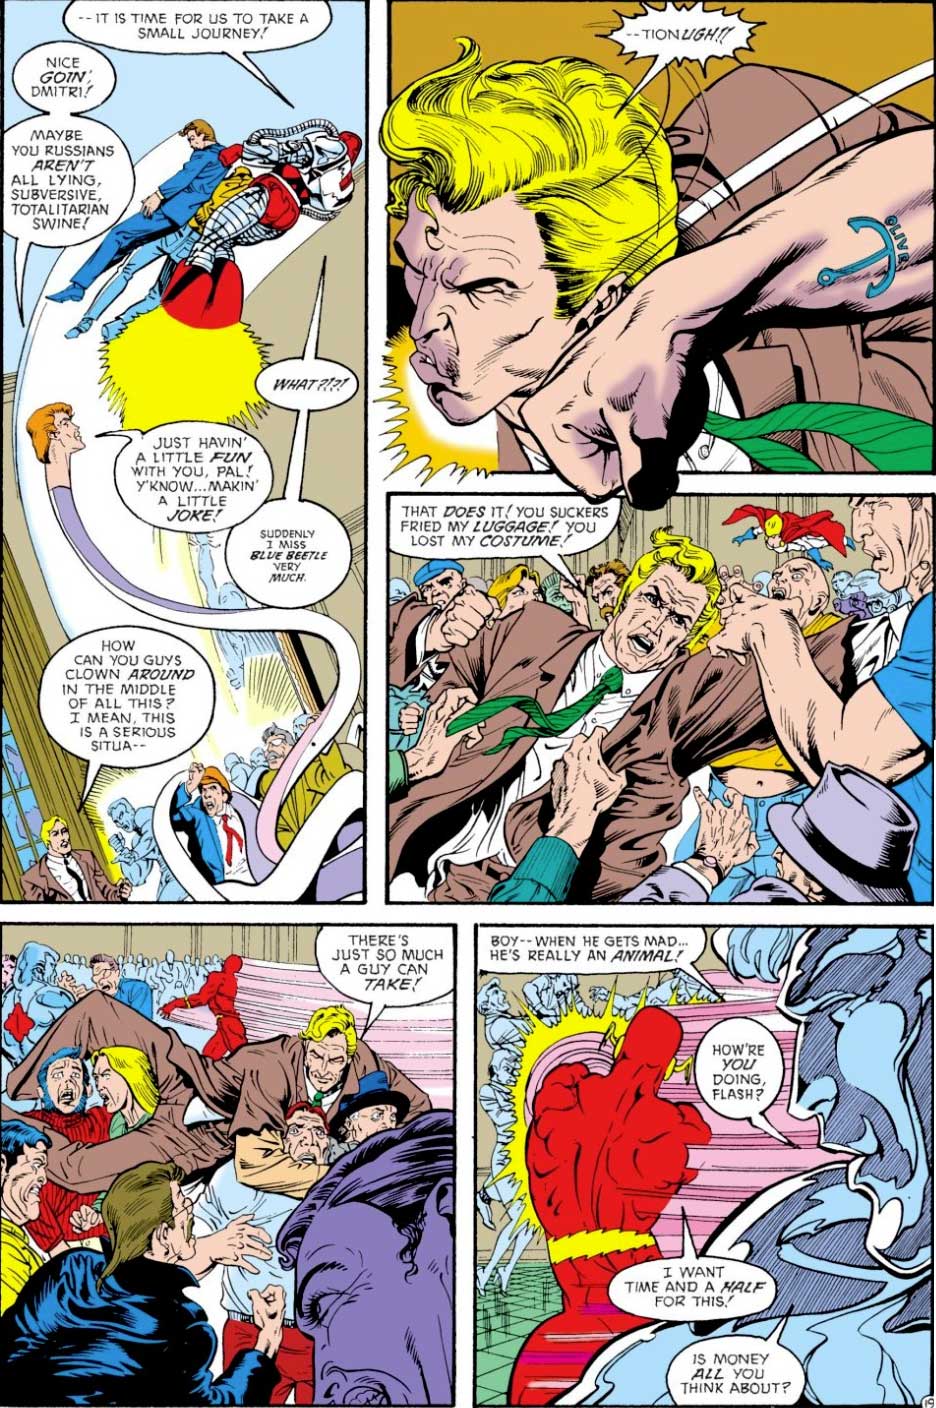 Justice League Europe #1 by Keith Giffen, JM DeMatteis, Bart Sears and Pablo Marcos